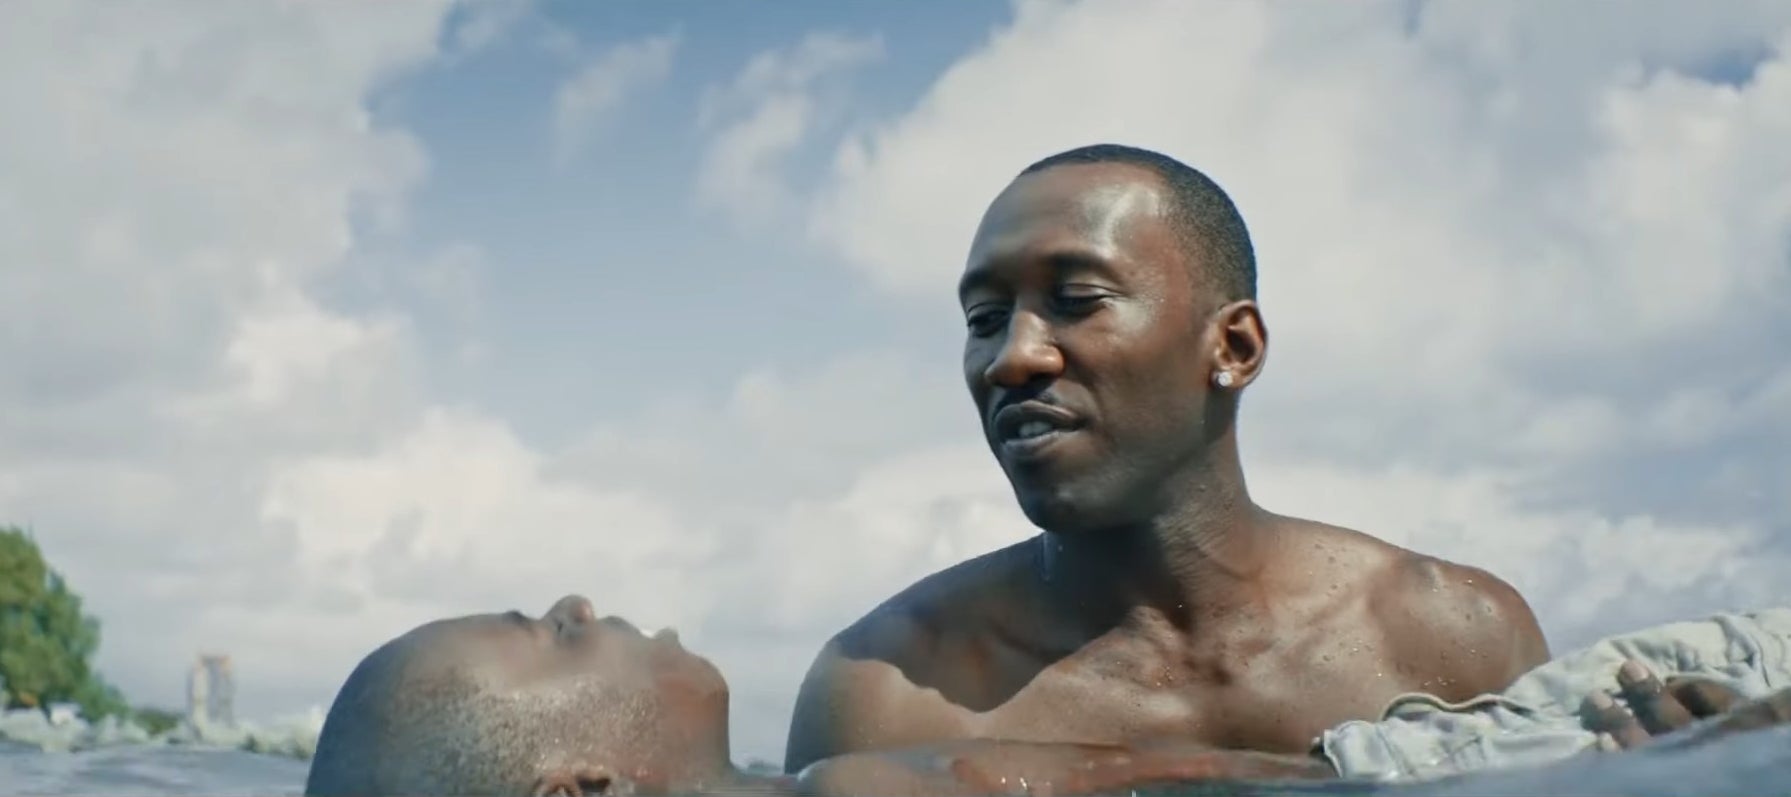 Juan holding Chiron up in the water in &quot;Moonlight&quot;